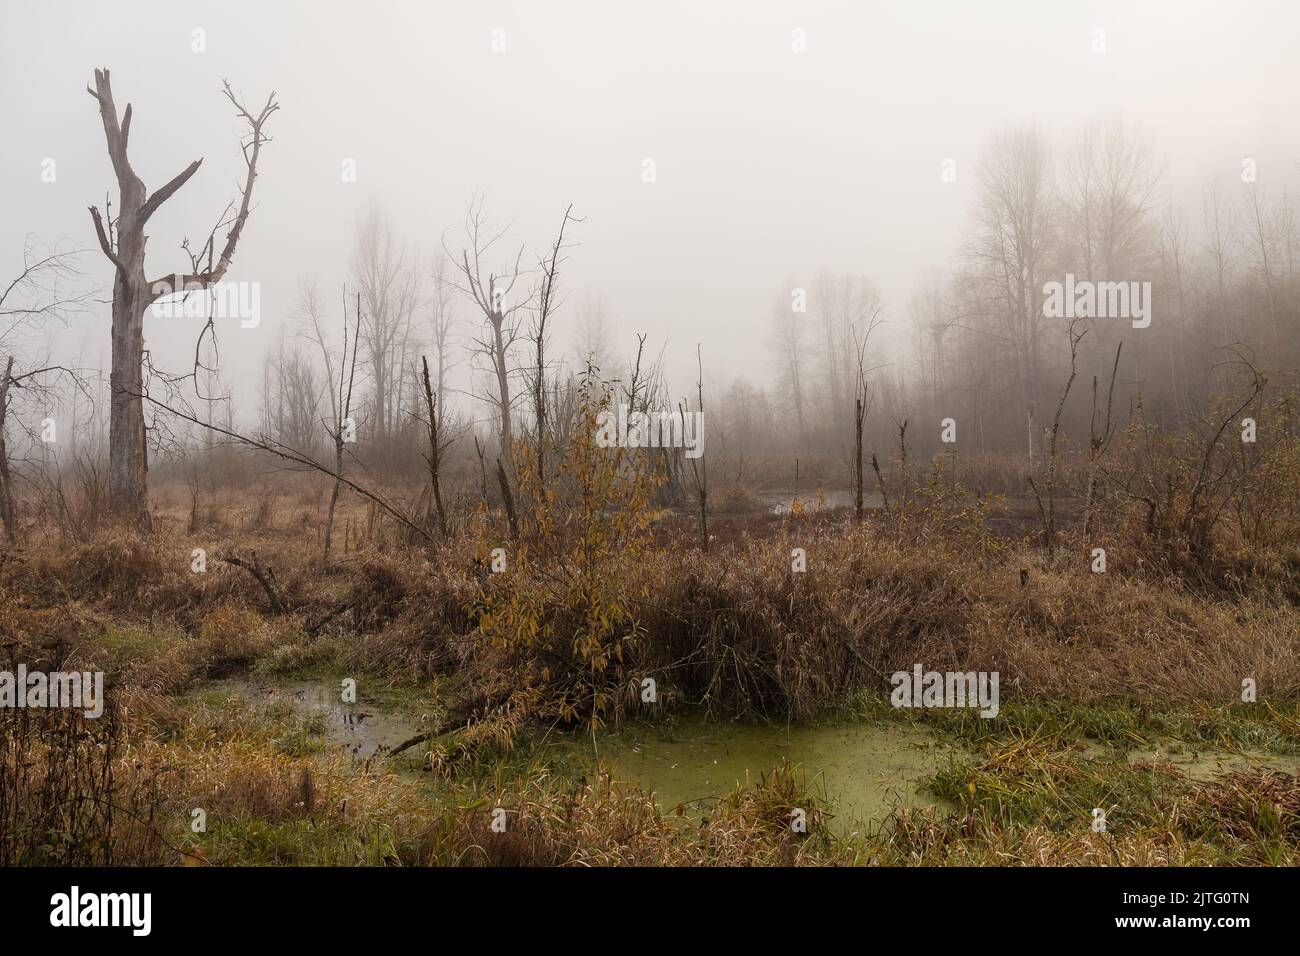 Tree Silhouettes and Grass in Environmental Park Wetland with Fog in Autumn Stock Photo